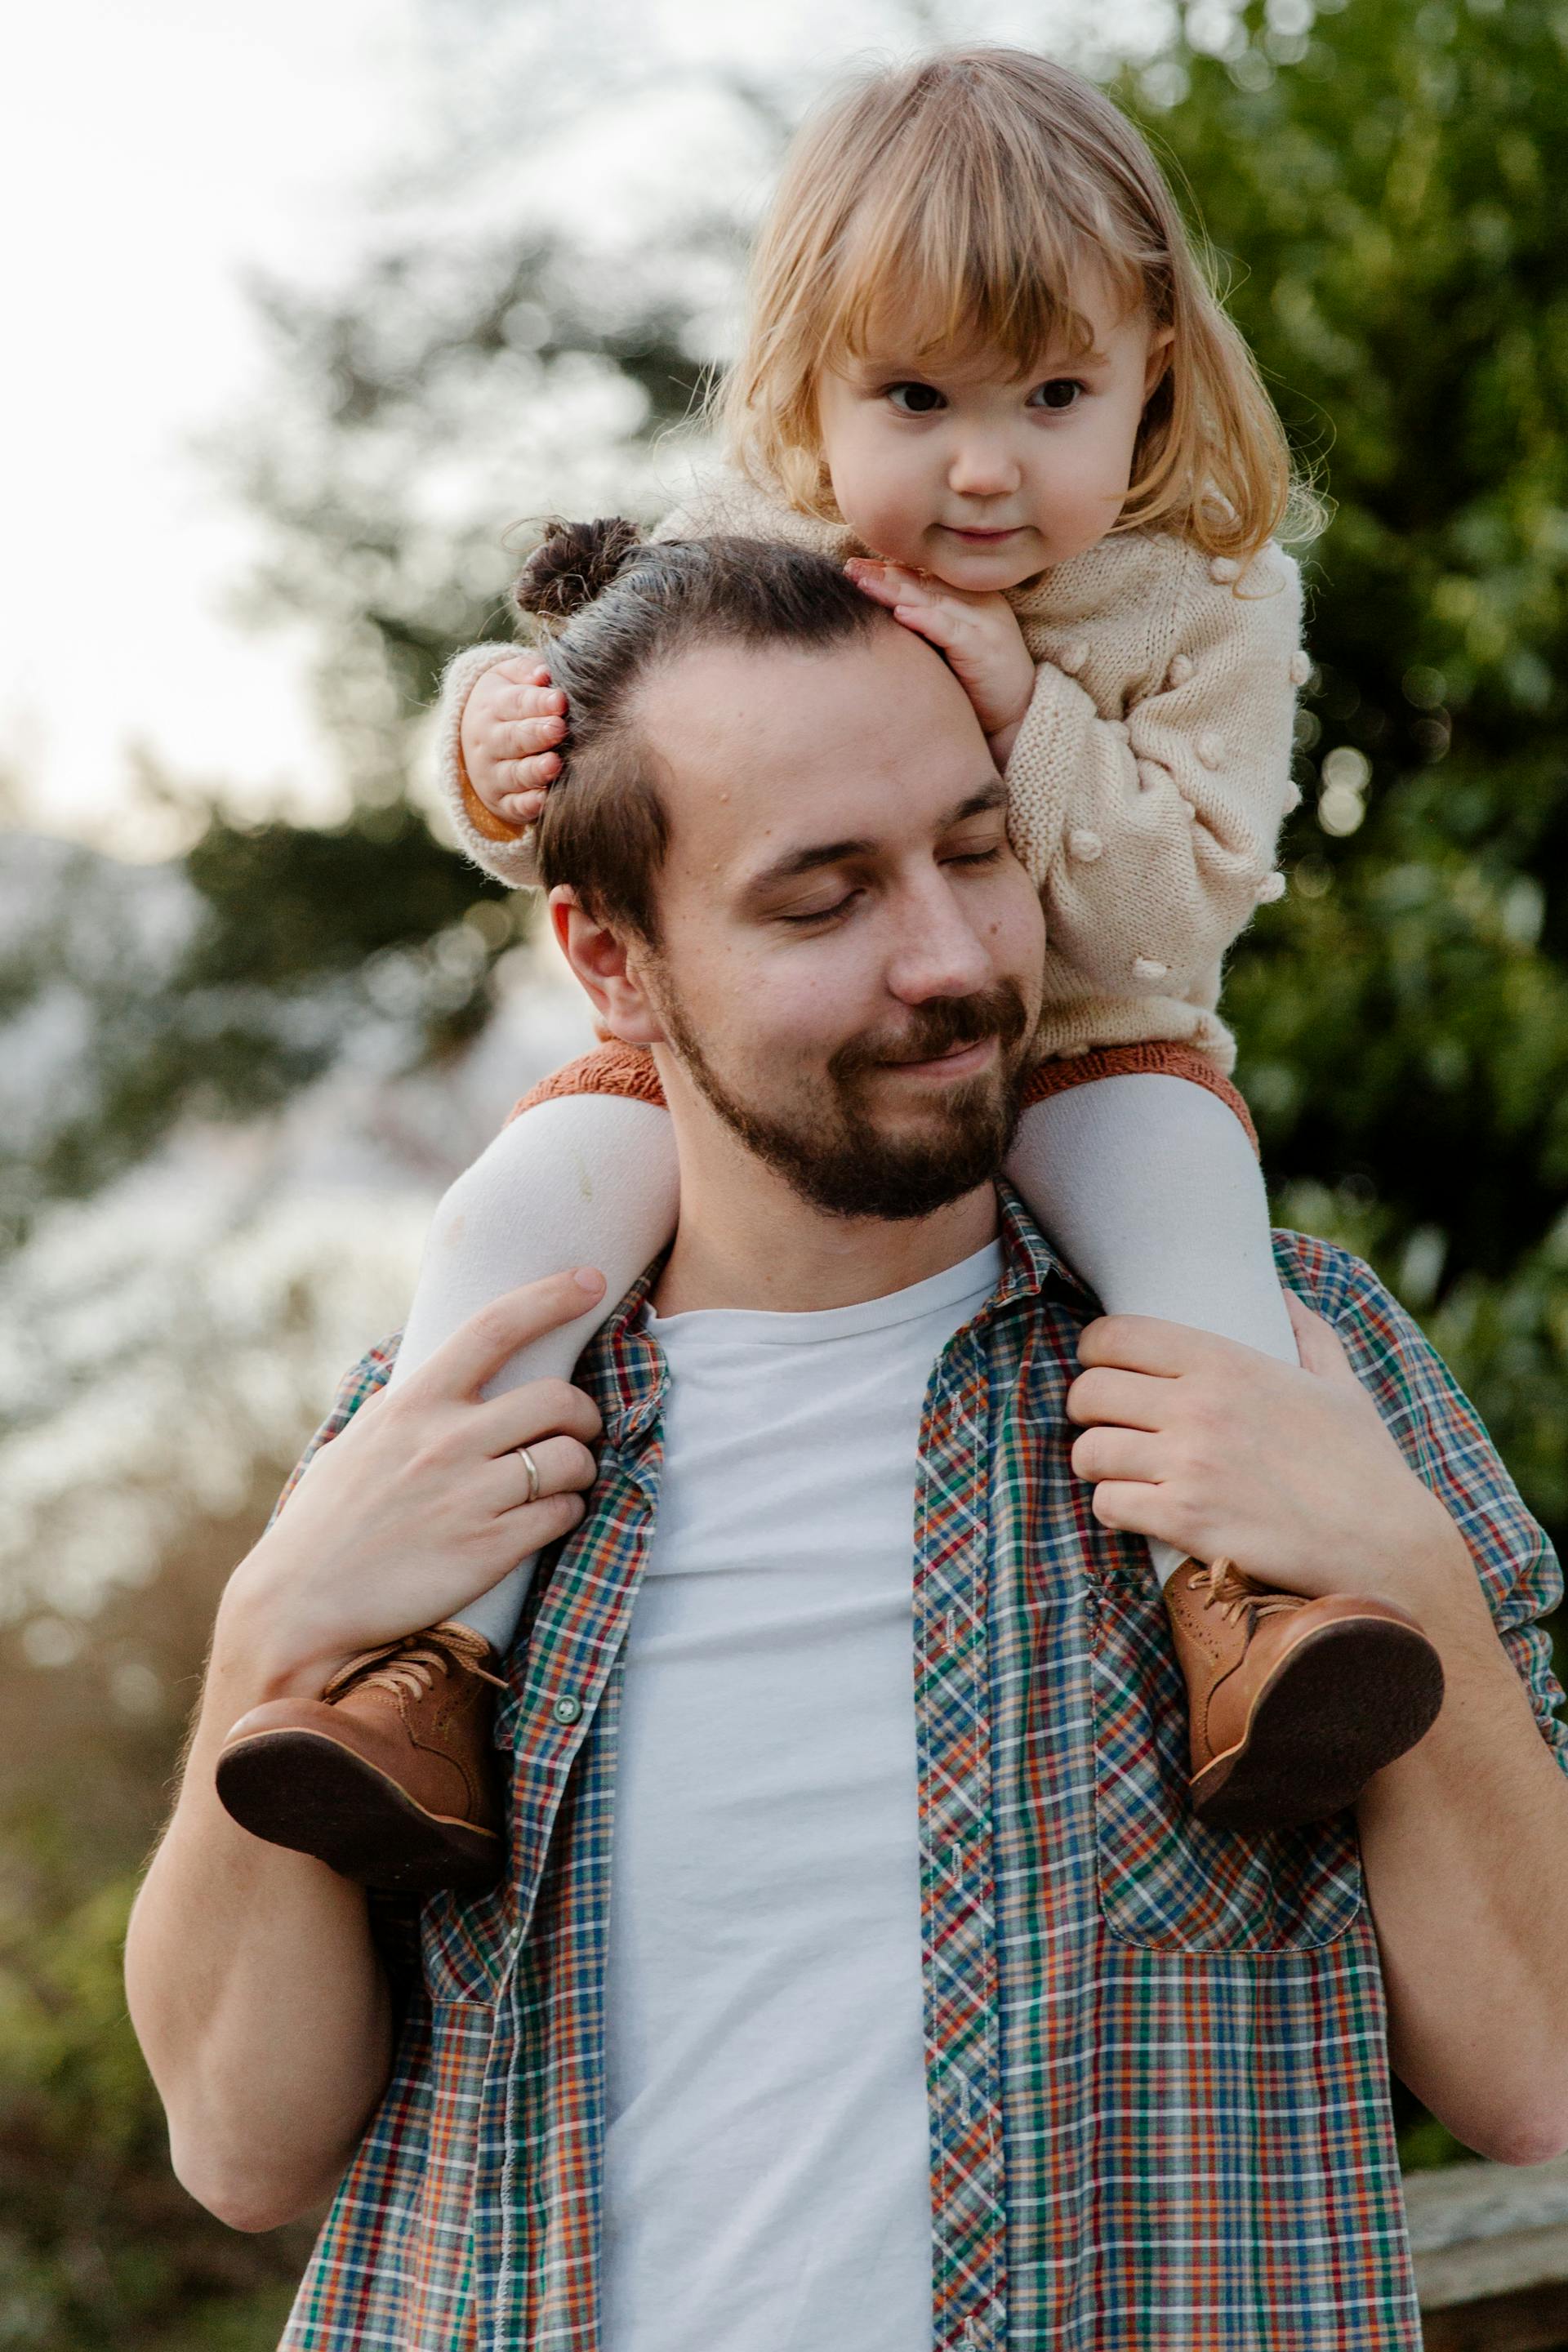 A father carrying his daughter | Source: Pexels